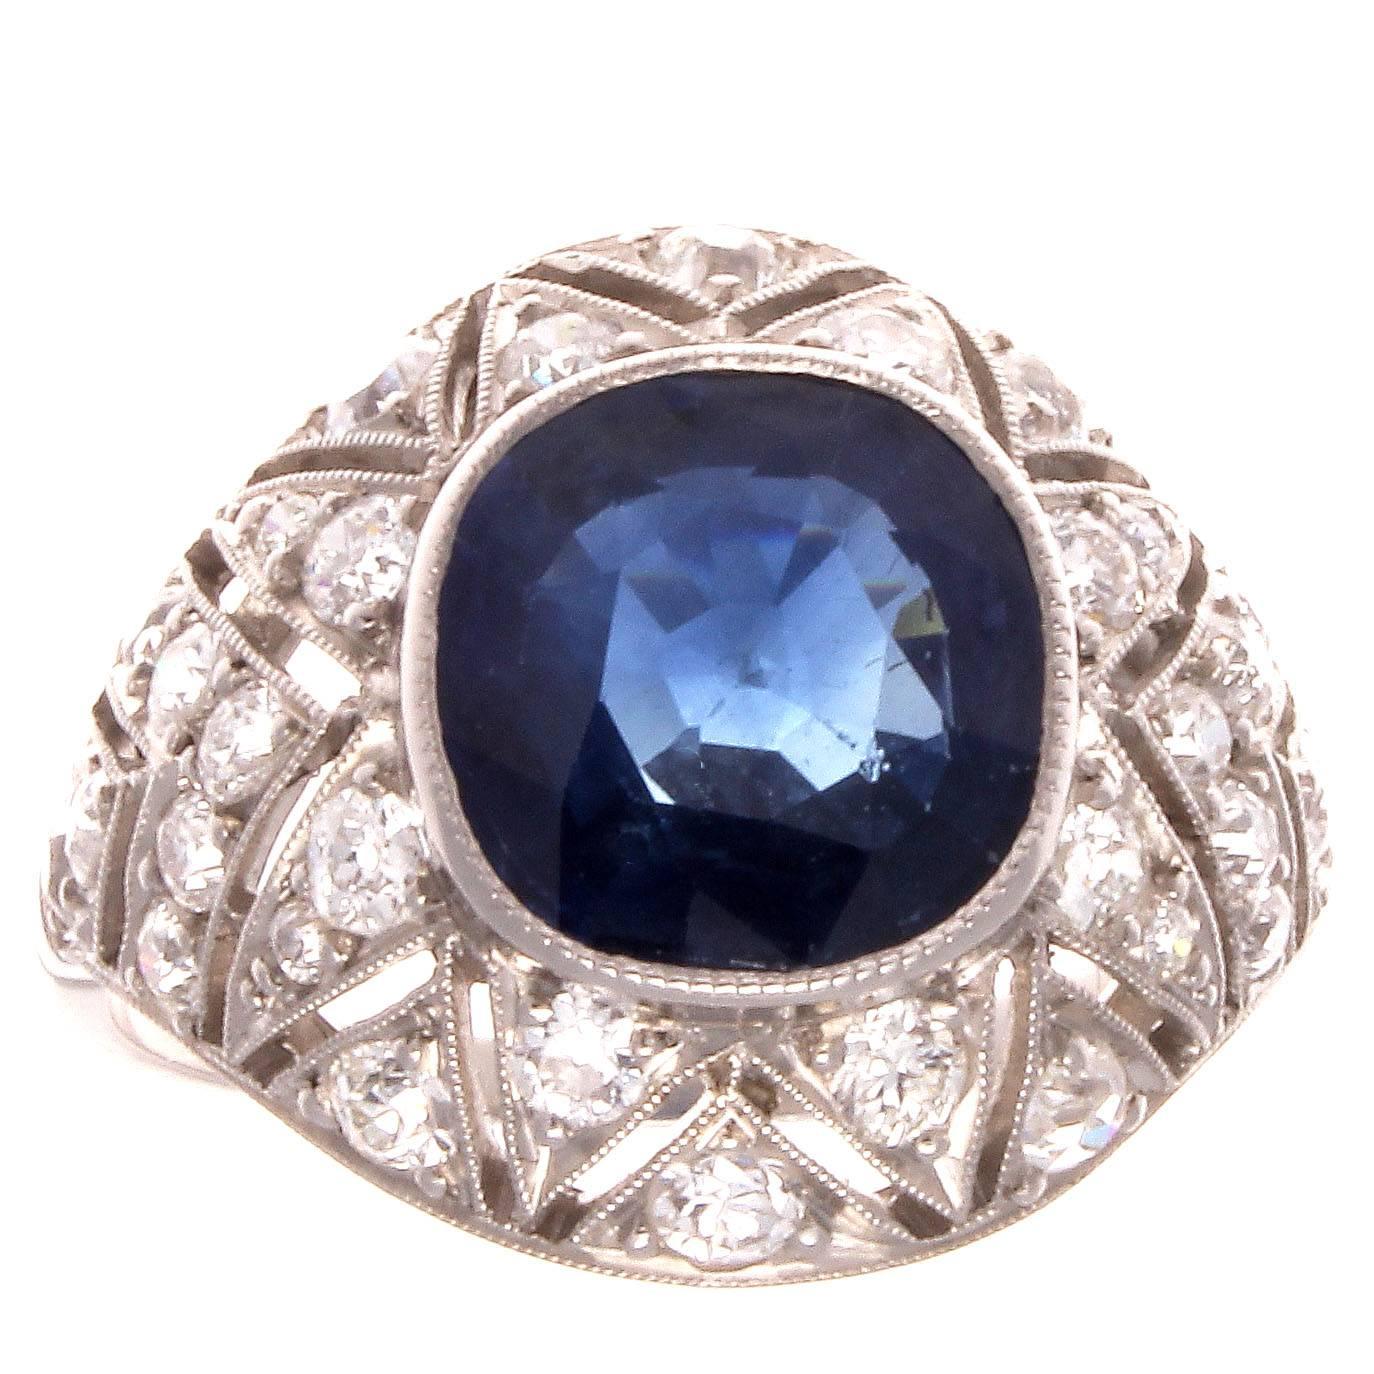 A nice blue Sapphire set in an intricately hand made filigree platinum ring with white diamond accents. 

Ring size 6 1/2 and may be re-sized to fit.